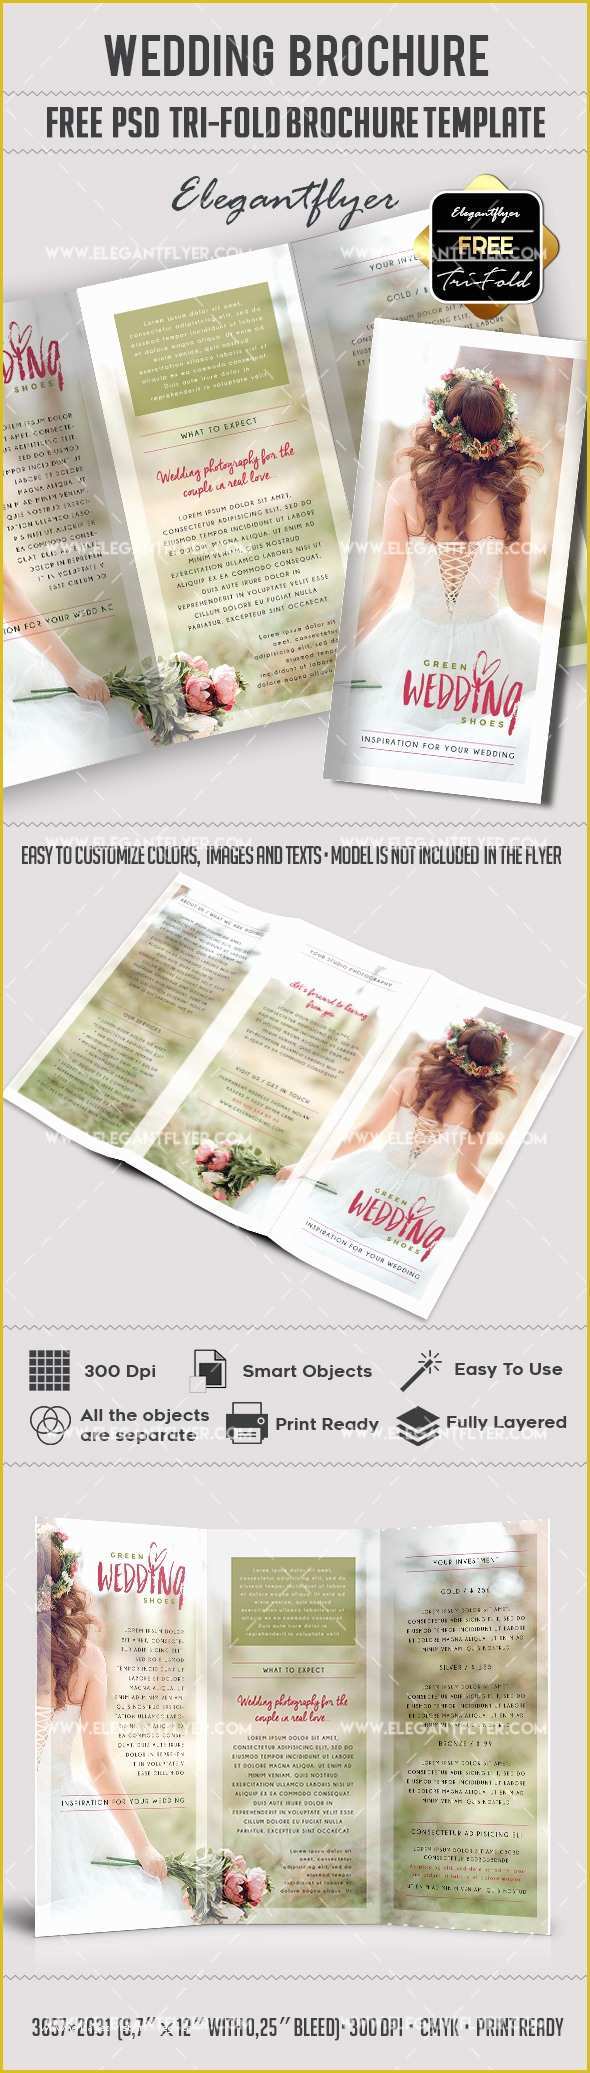 Free Flyer Brochure Templates Of Wedding – Free Tri Fold Psd Brochure Template – by